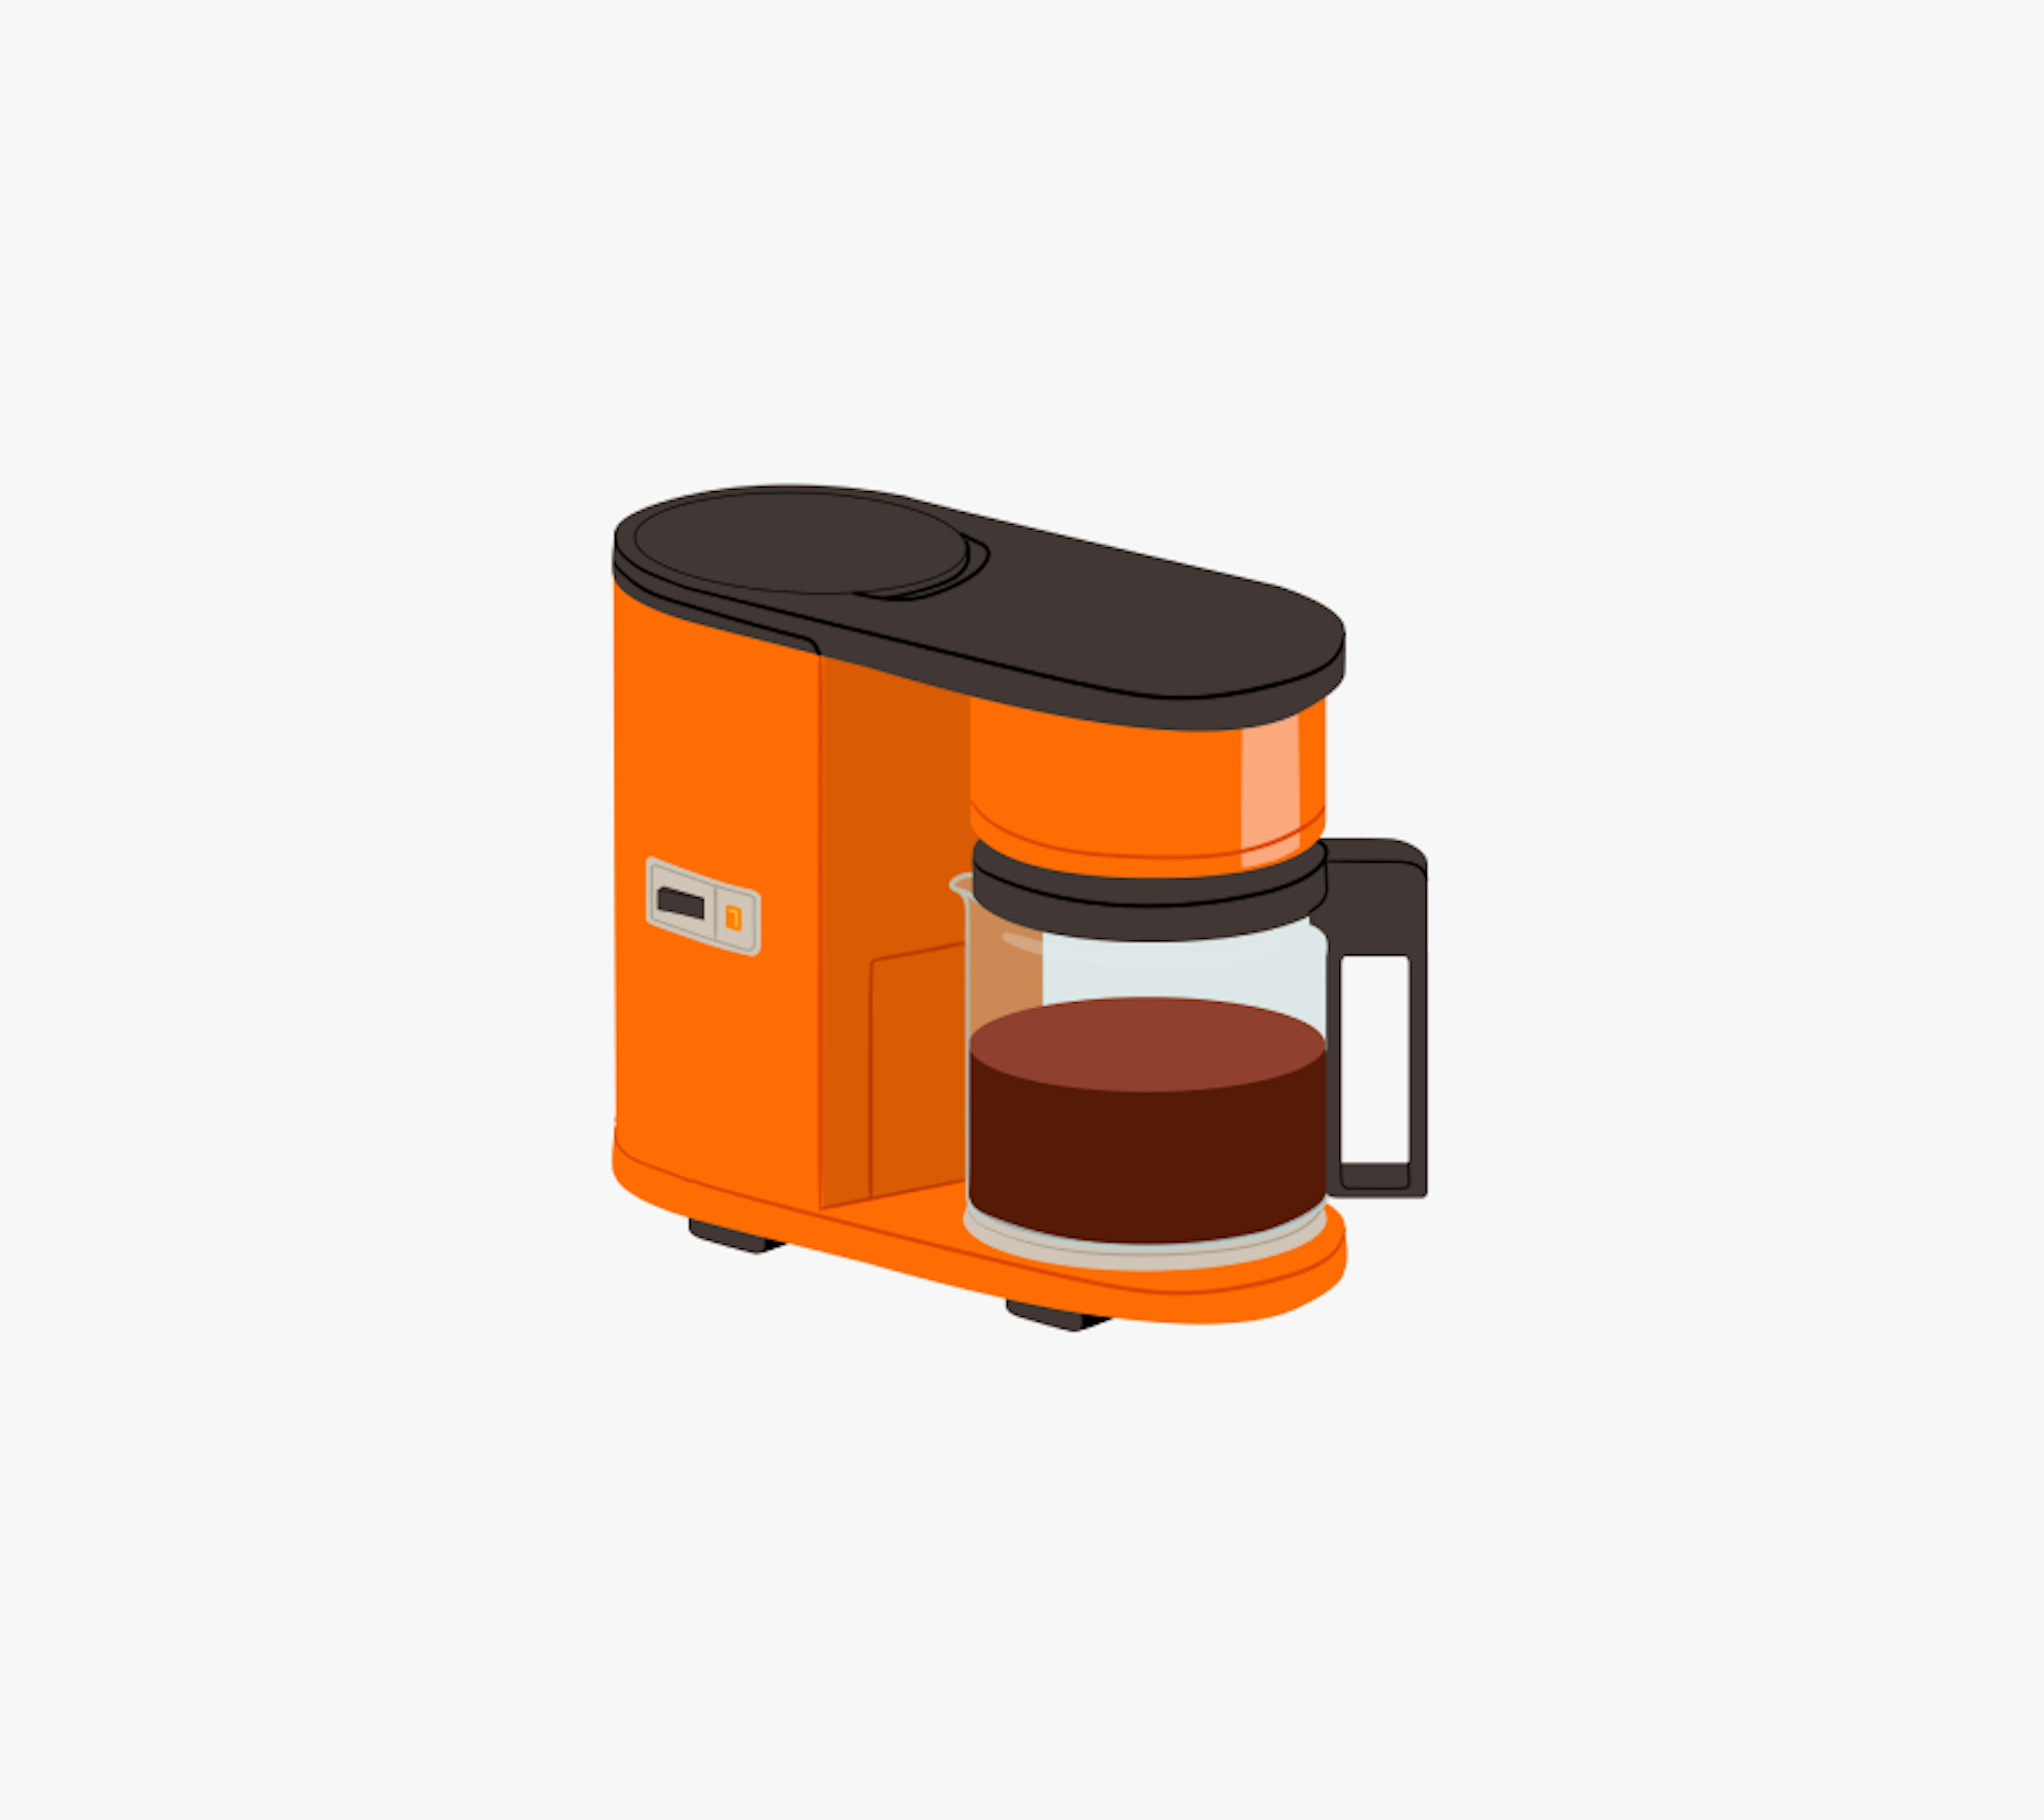 An orange and black coffee maker with a glass carafe filled with coffee.